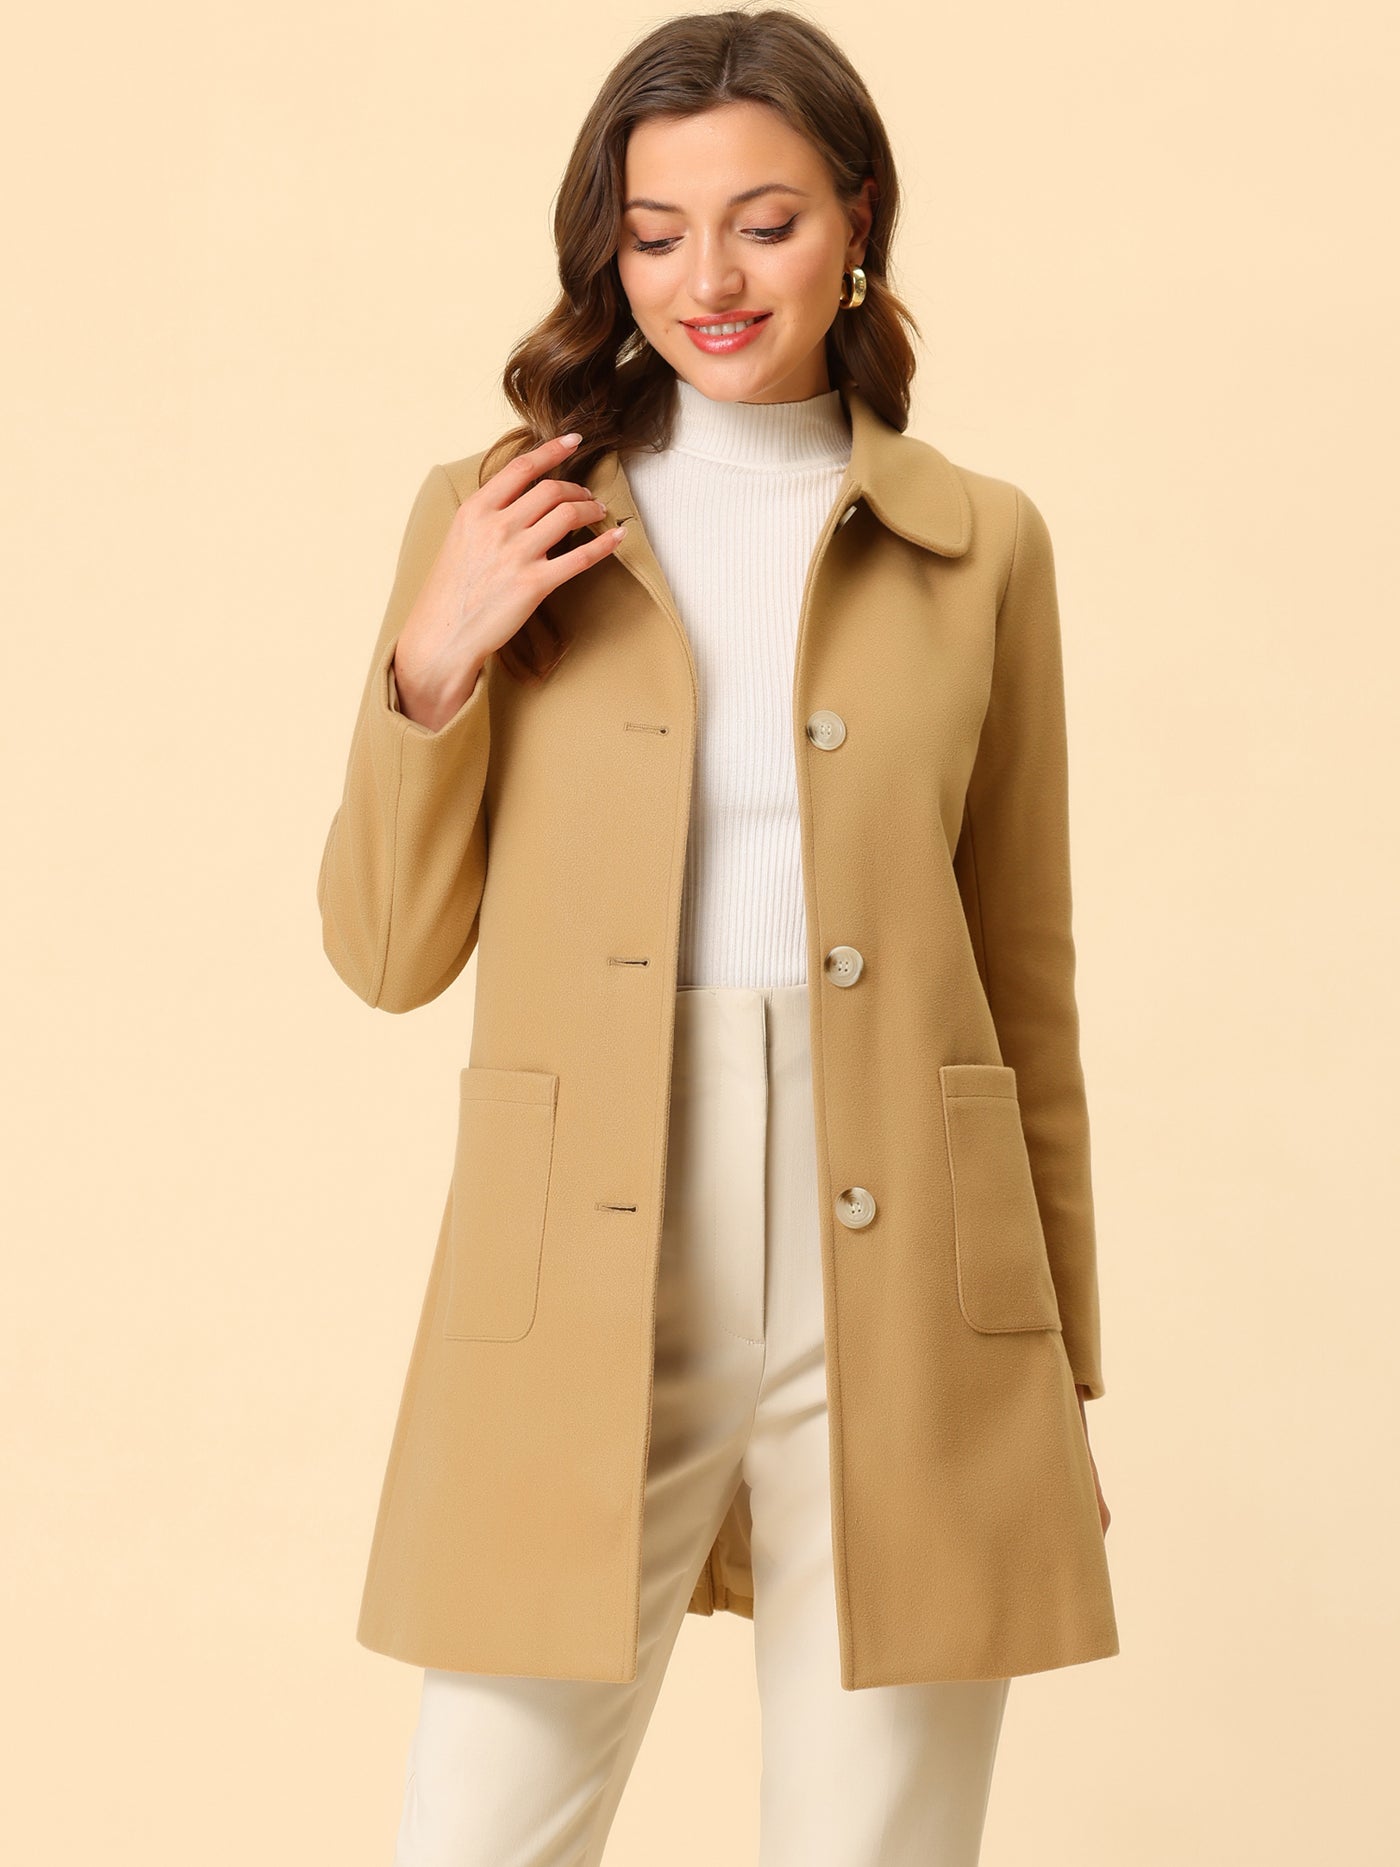 Allegra K Turn Down Collar Single Breasted Winter Outwear Trench Coat